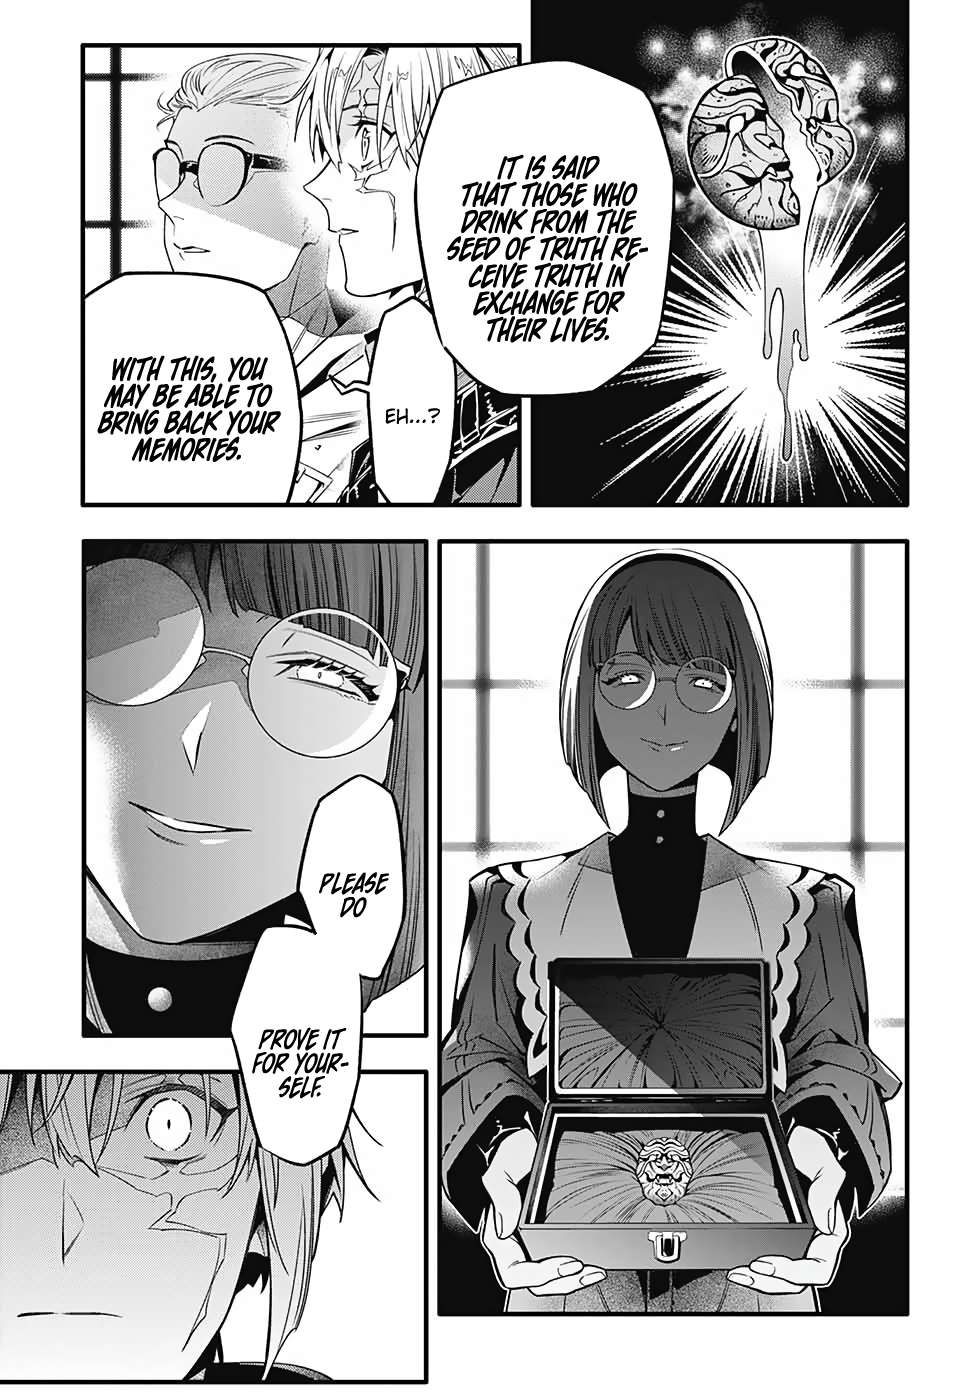 D.Gray-man chapter 251 page 29